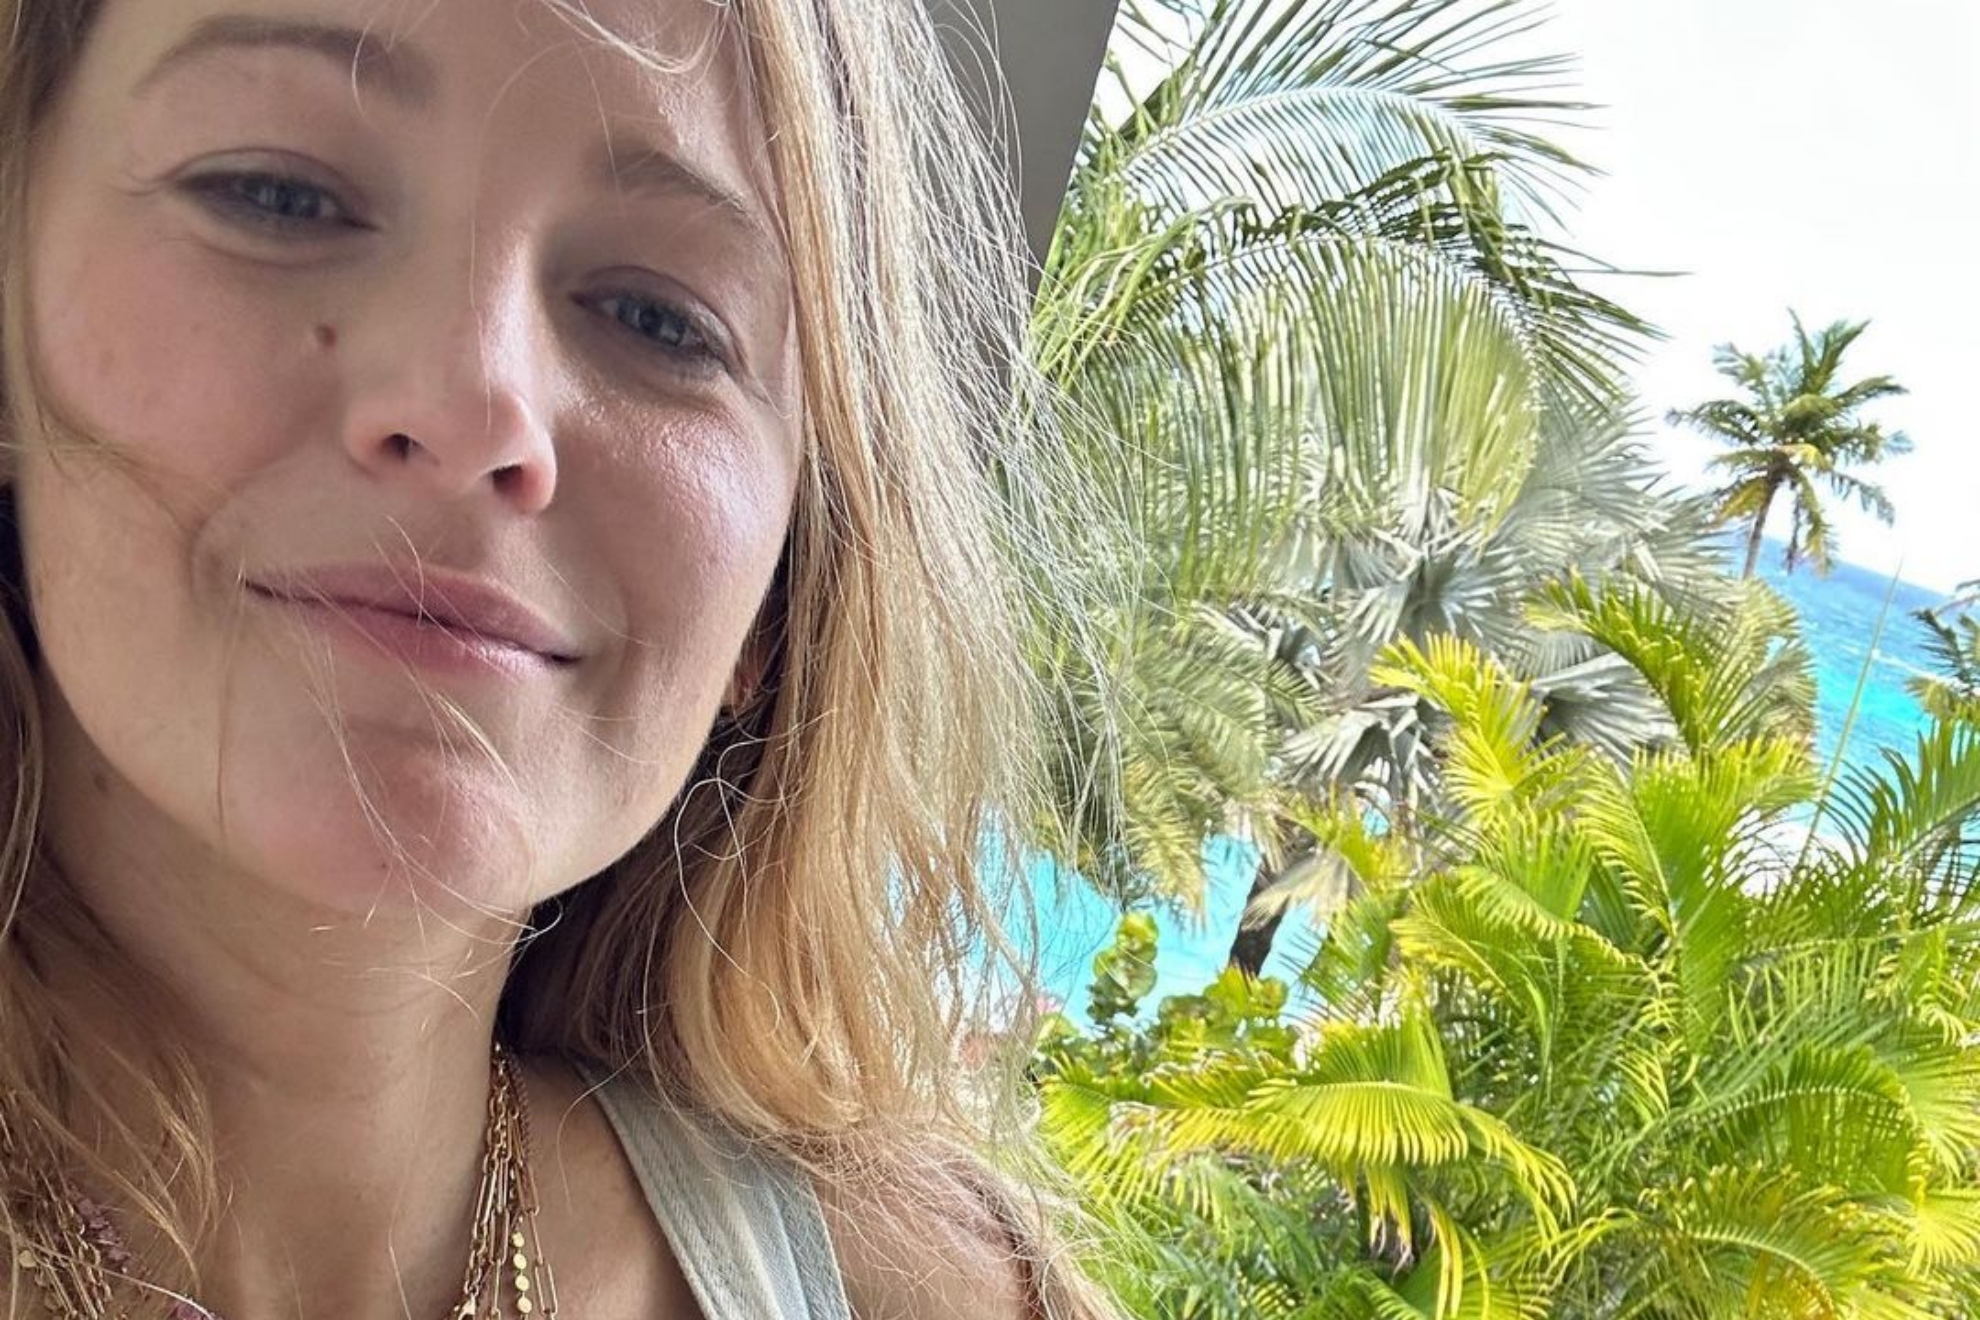 Blake Lively looking breathtaking in a bikini two months after giving birth to her fourth child